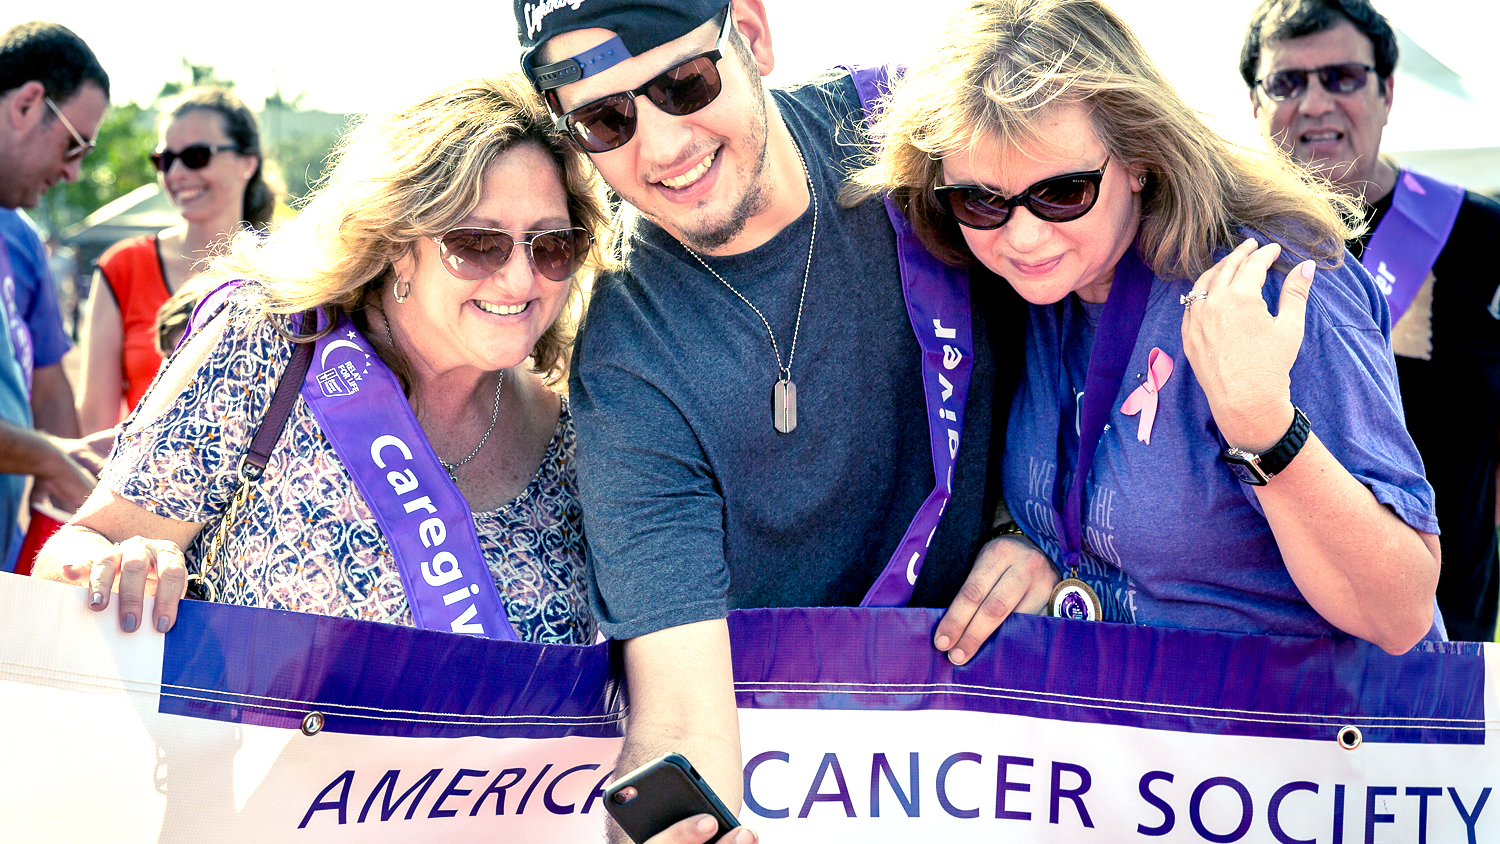 'Survivors Standing Strong' at Relay For Life Parkland Coral Springs April 13